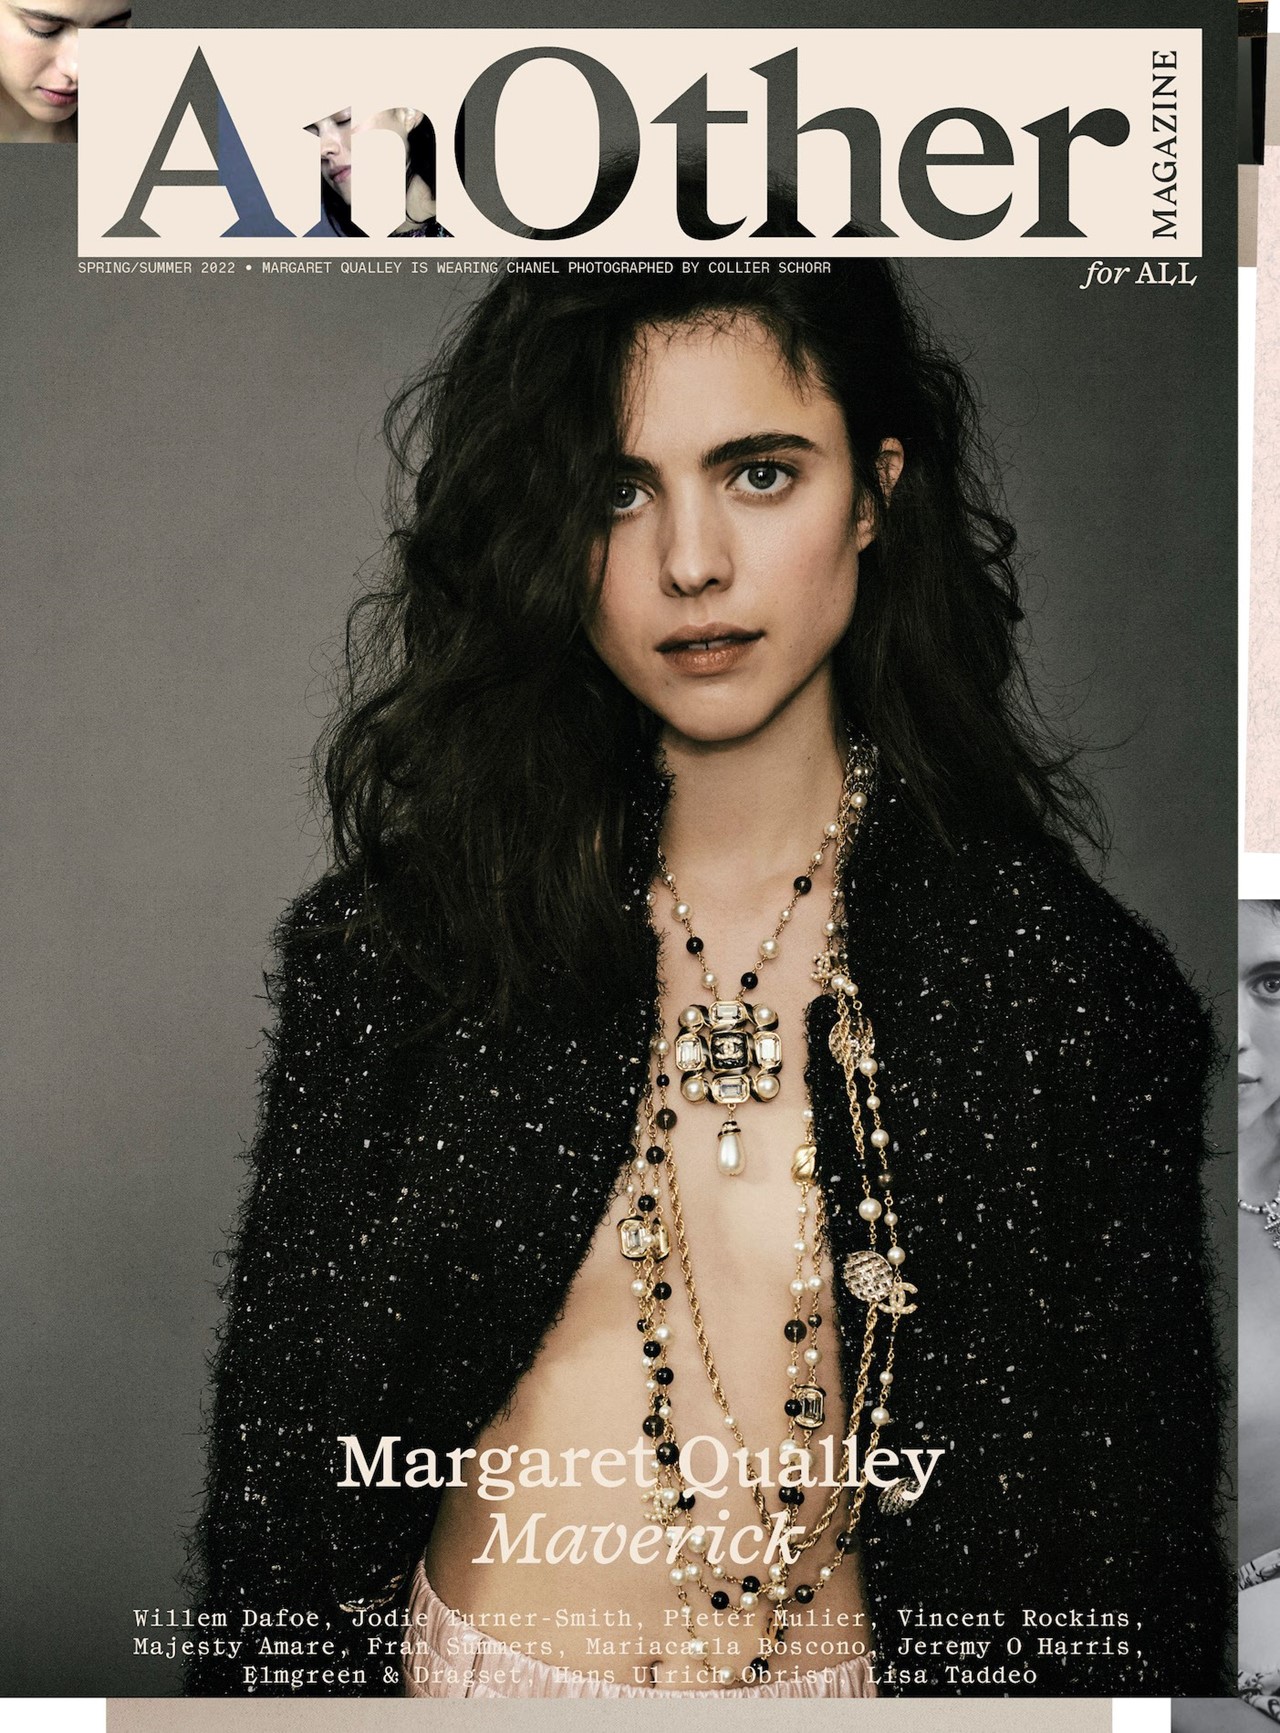 You're Supposed to Be Messy”: Margaret Qualley Is a Maverick in the Making